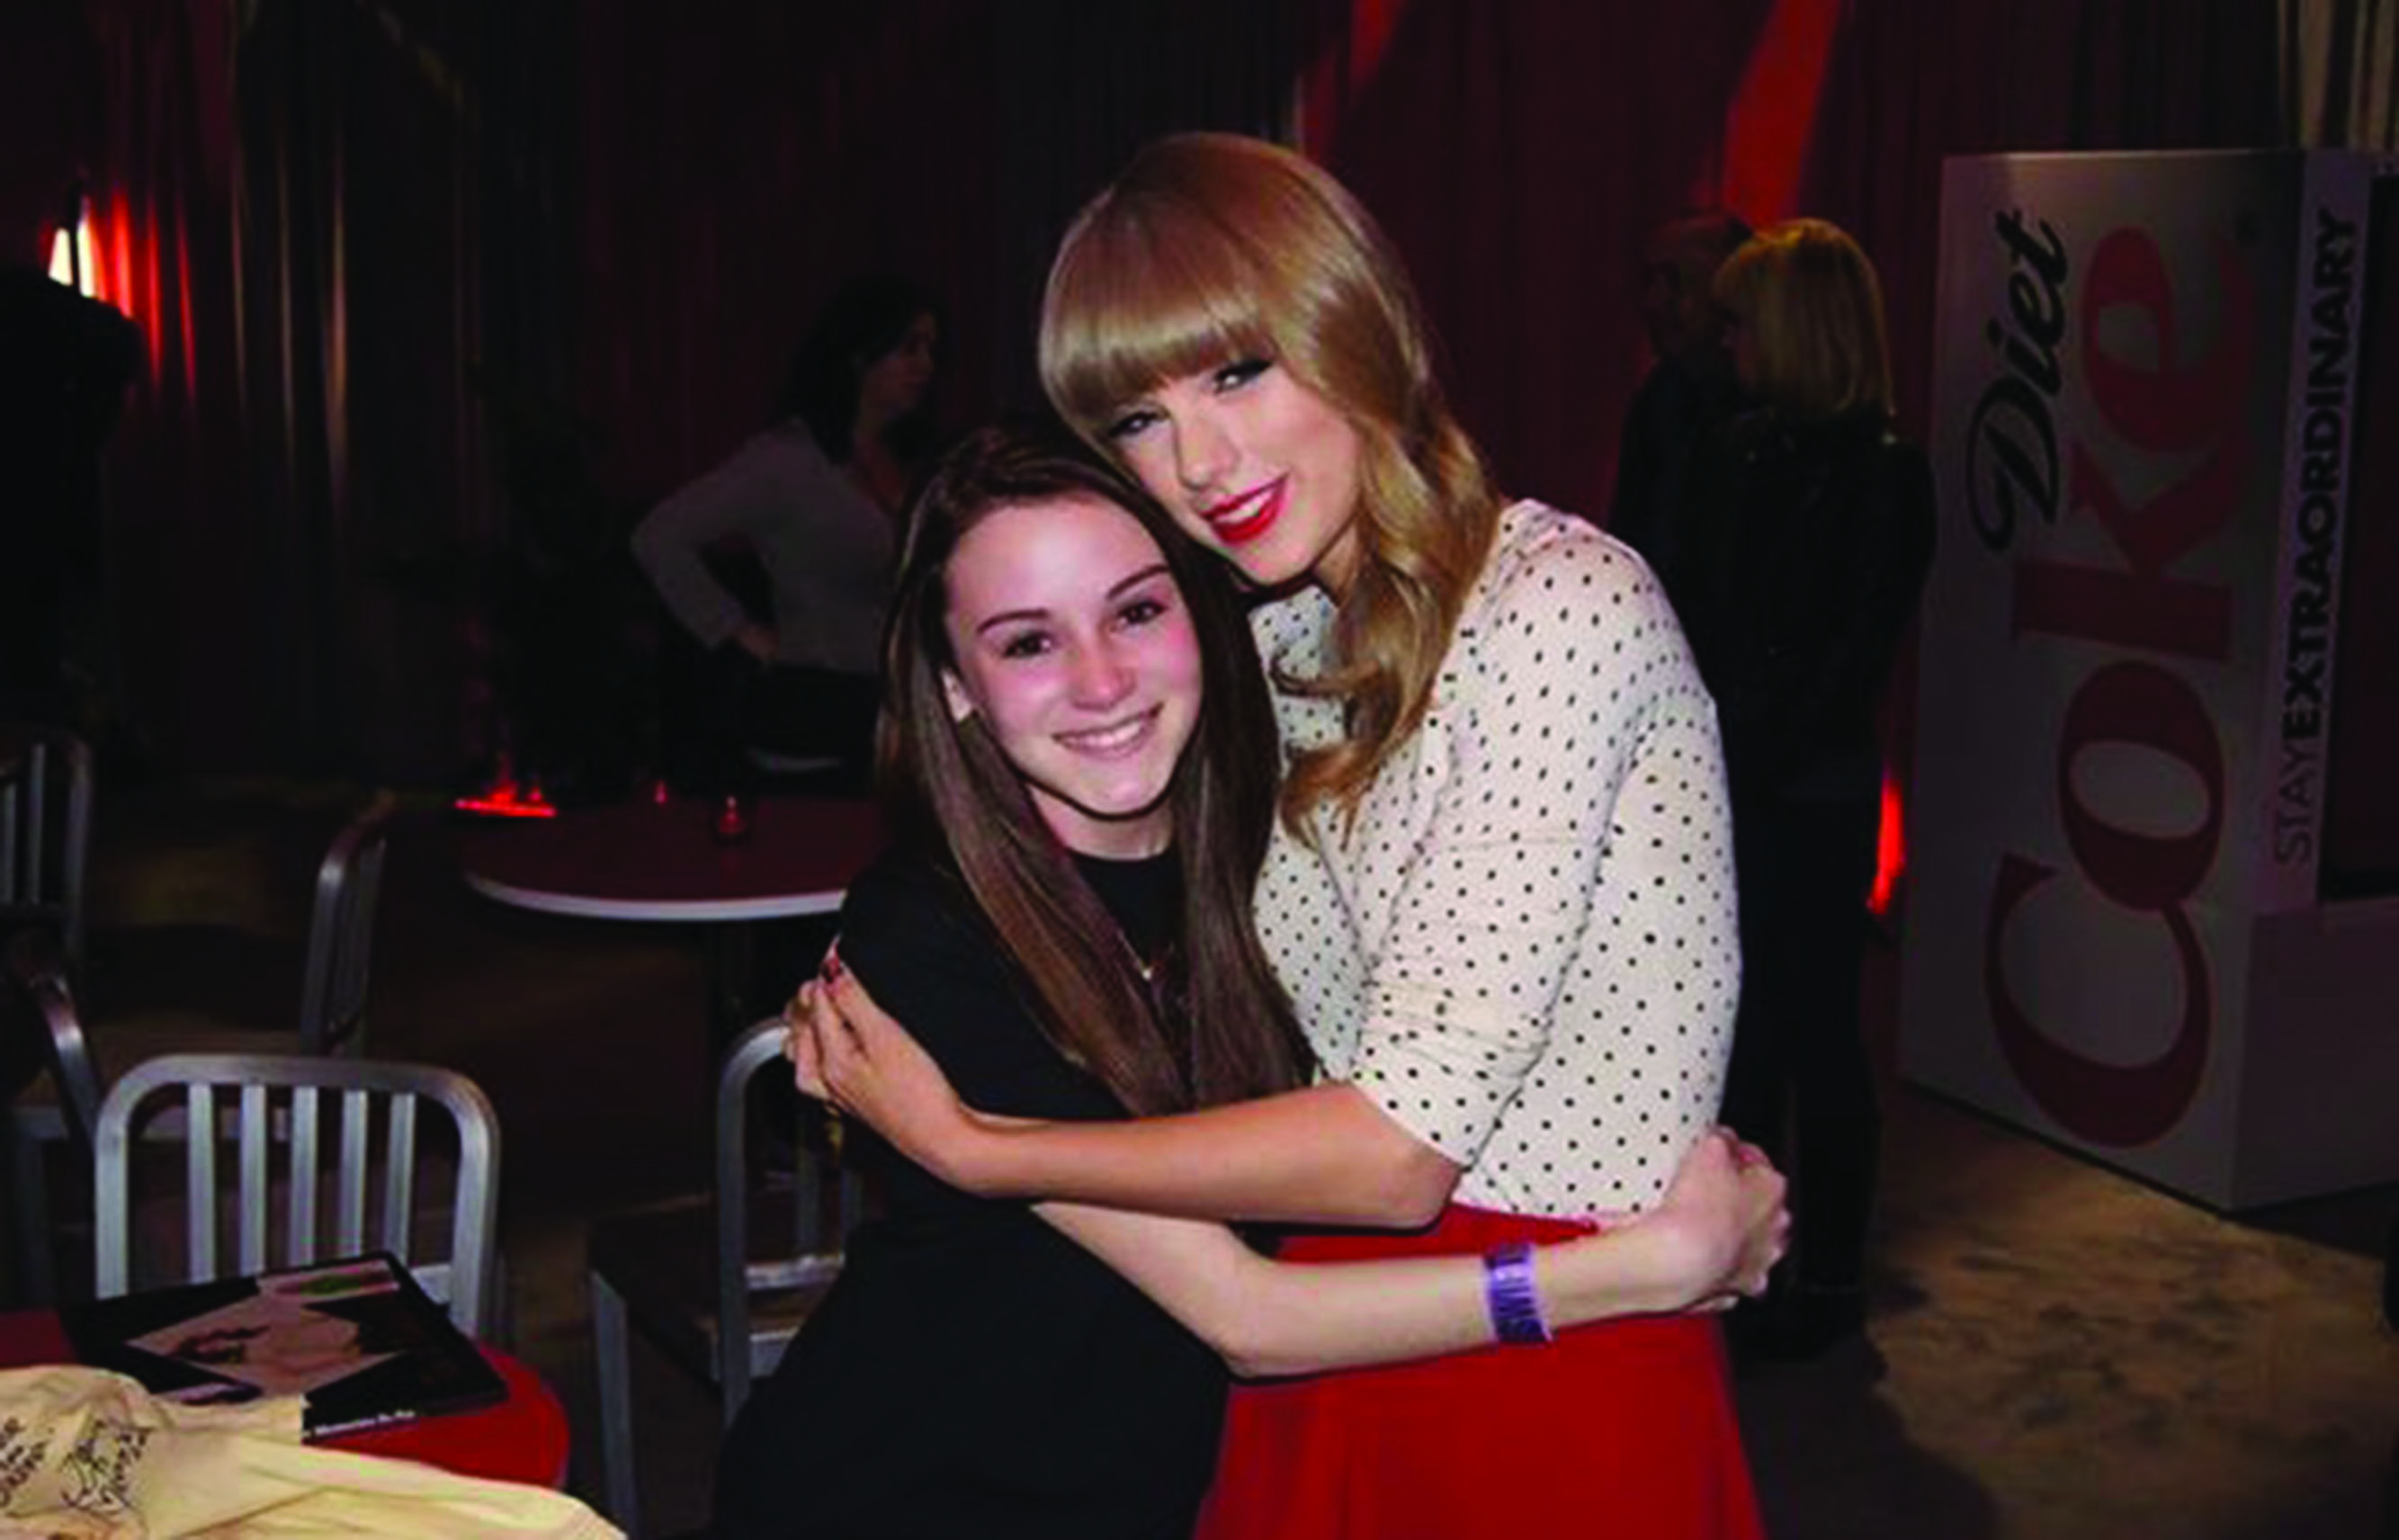 Junior Brenna Bode, left, and Taylor Swift pose for a photo before one of Swifts concerts. Bode has become friends with the pop star.
Courtesy Photo